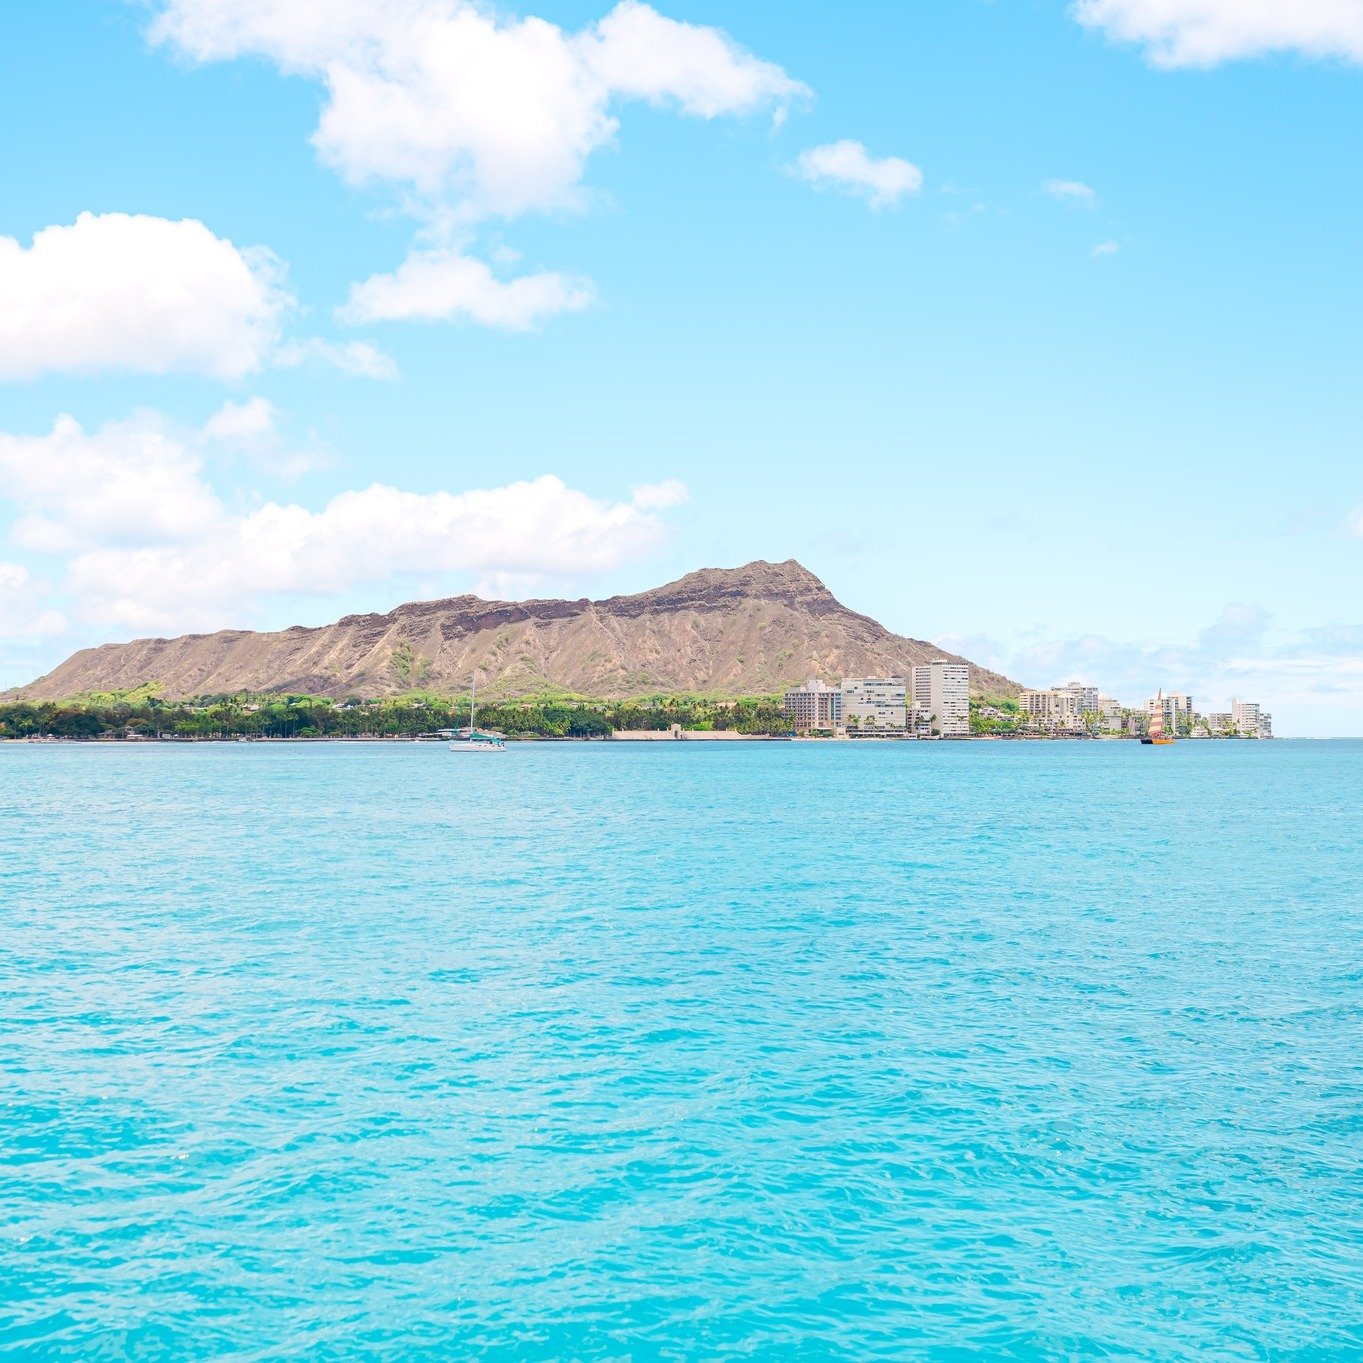 Being a photographer in Hawaii is such an incredible adventure! 🌺 I get to island hop often, and since I always have my camera with me, I love snapping landscape photos in my downtime. This shot is a stunning view of Diamond Head from the ocean, tak